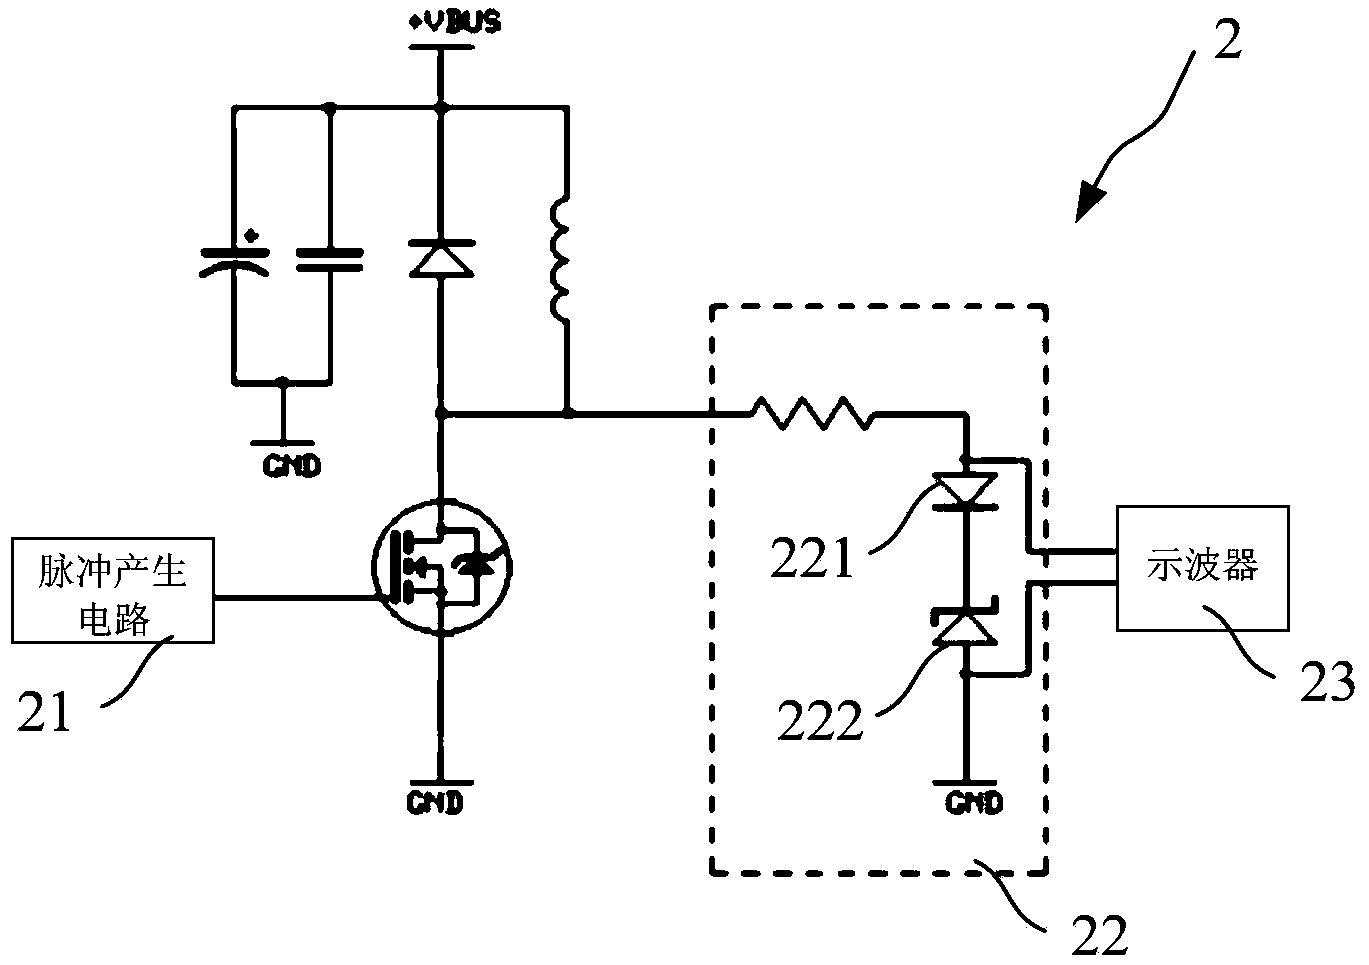 Measuring circuit for breakover voltage drop of semiconductor switch device